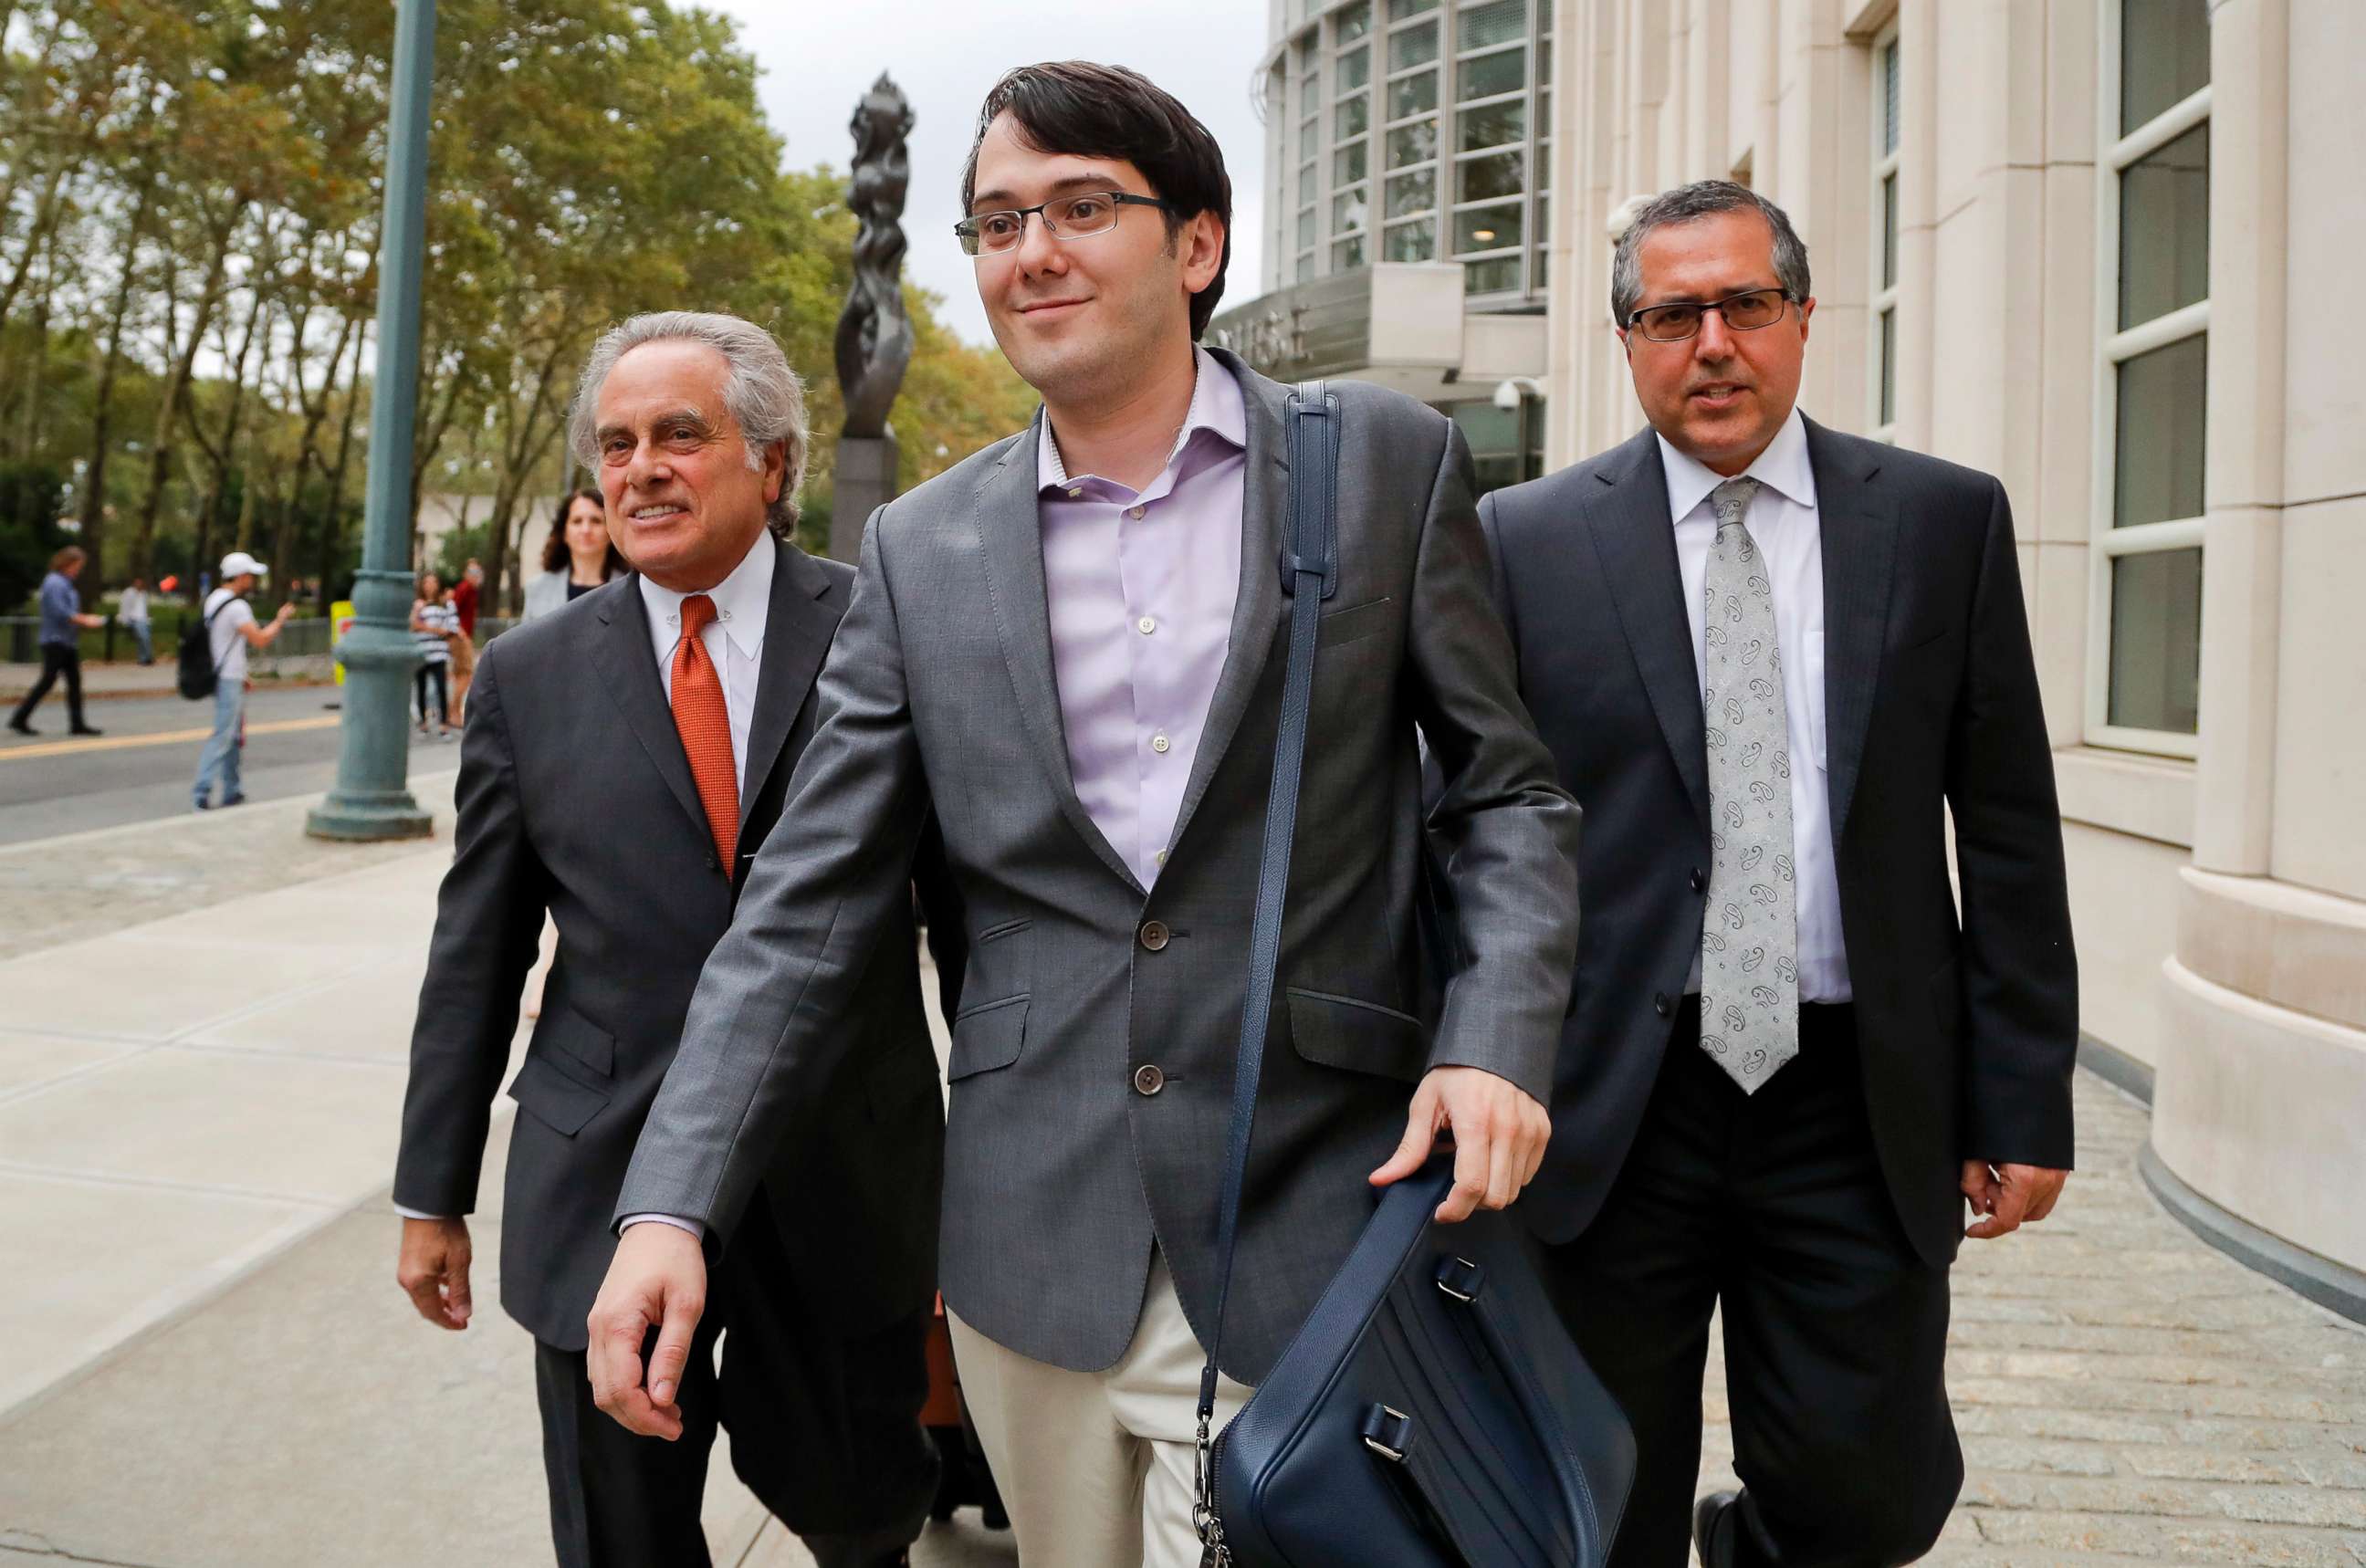 PHOTO: Former biotech CEO Martin Shkreli, center, leaves federal court with his attorney Benjamin Brafman, left, in New York, July 27, 2017.